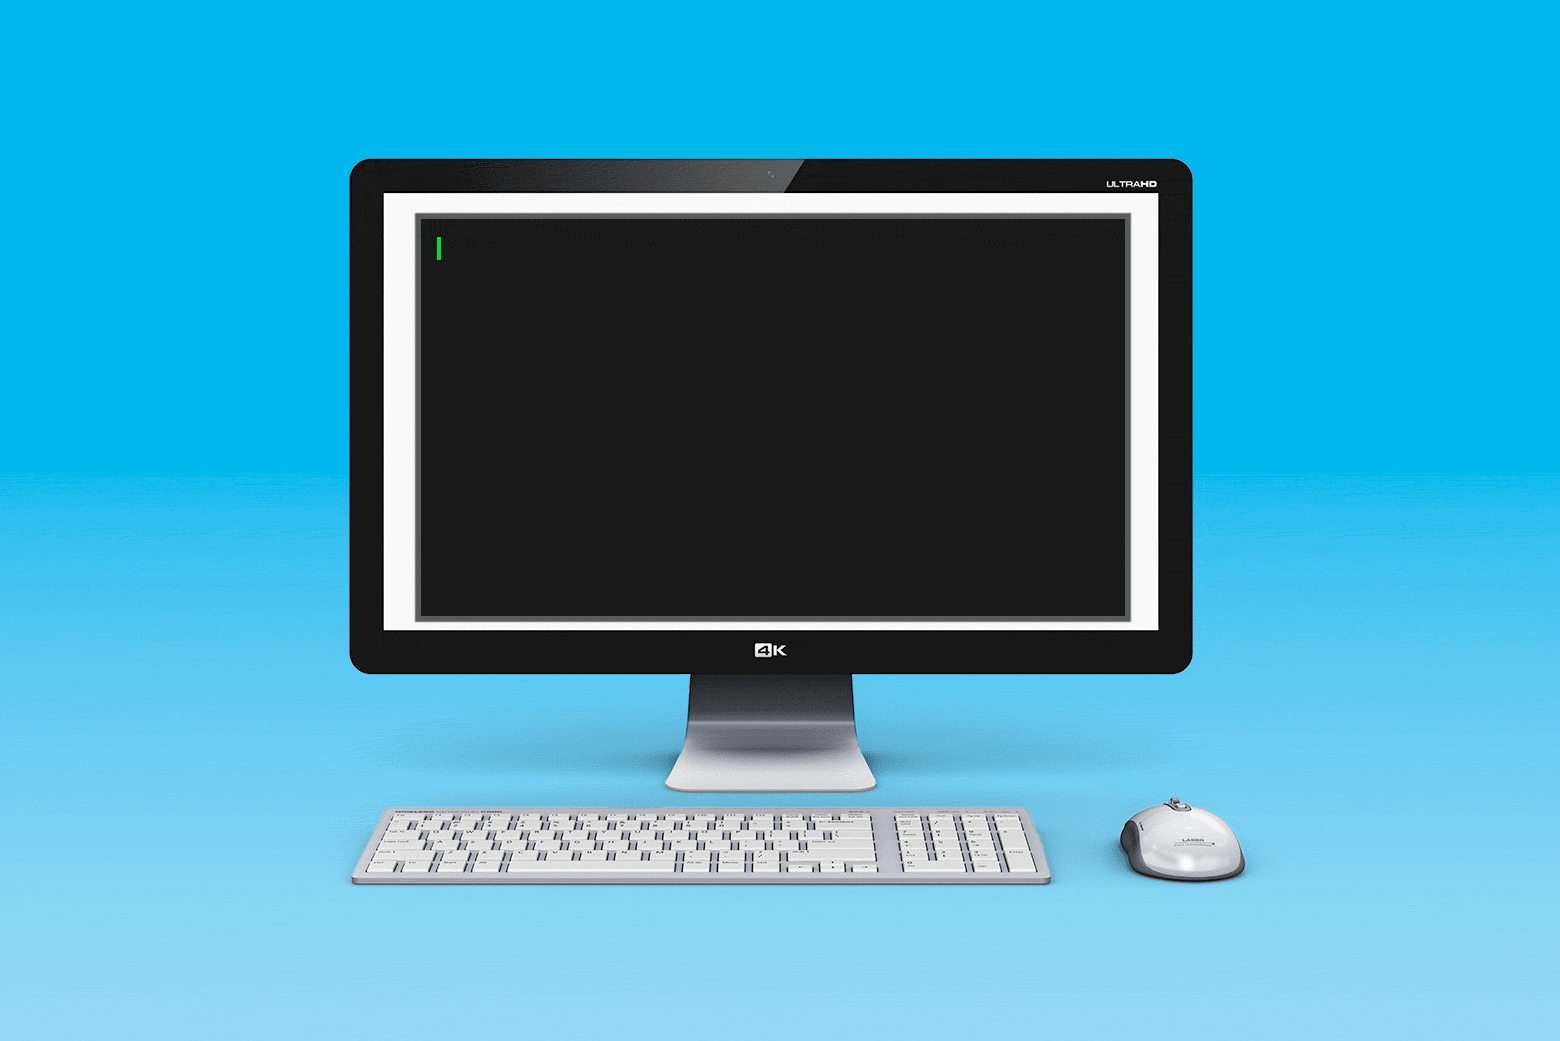 A computer monitor, keyboard, and mouse. On the monitor appears a memorandum: "To All Employees," from "A.I."